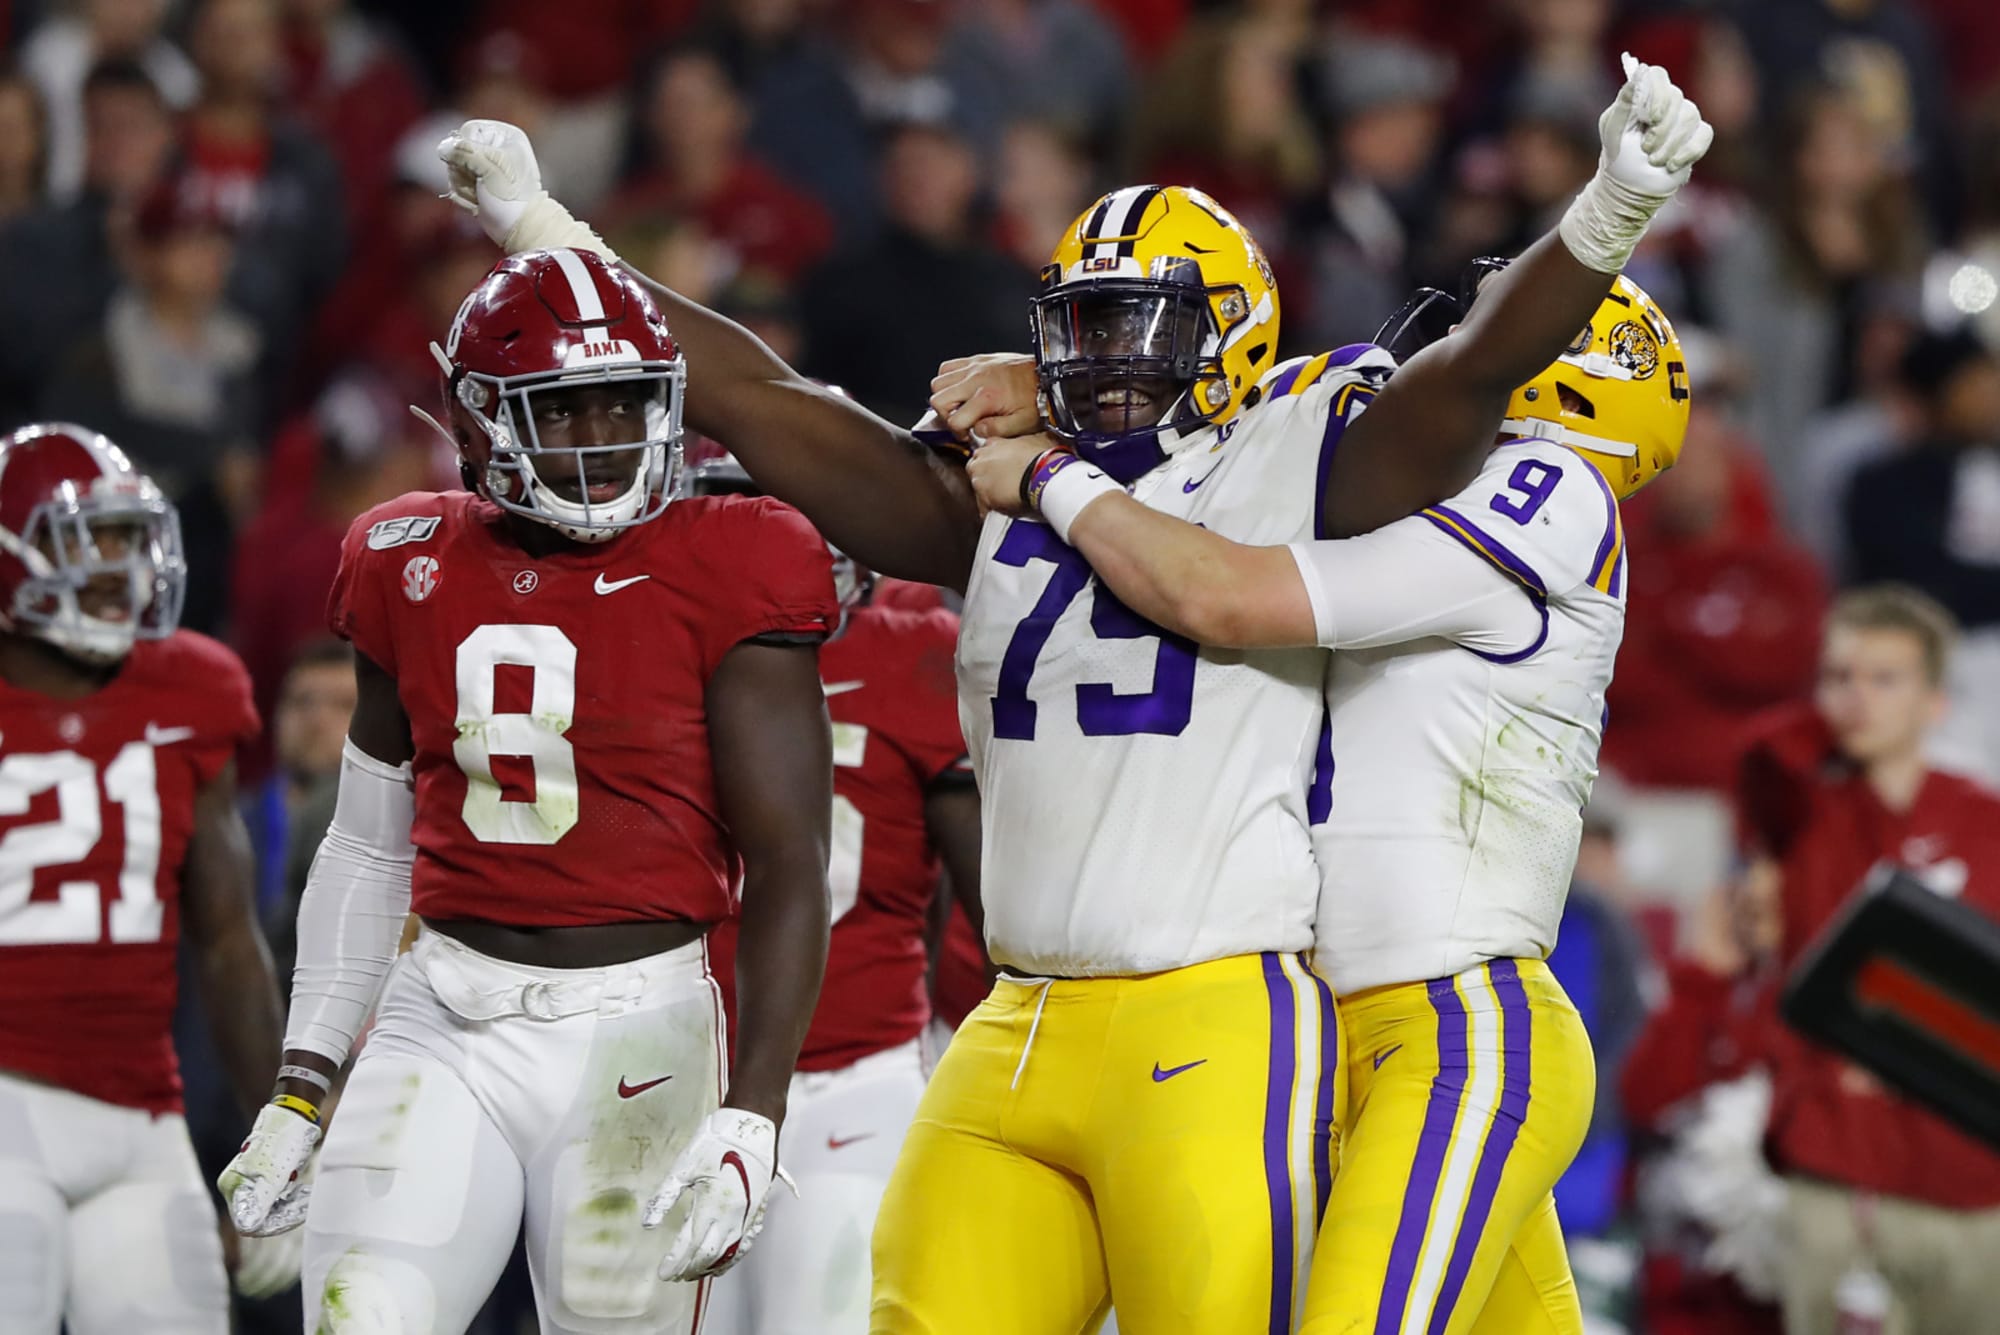 College Football Playoff Rankings 2019: Projected Top 25, Week 12 - Page 2